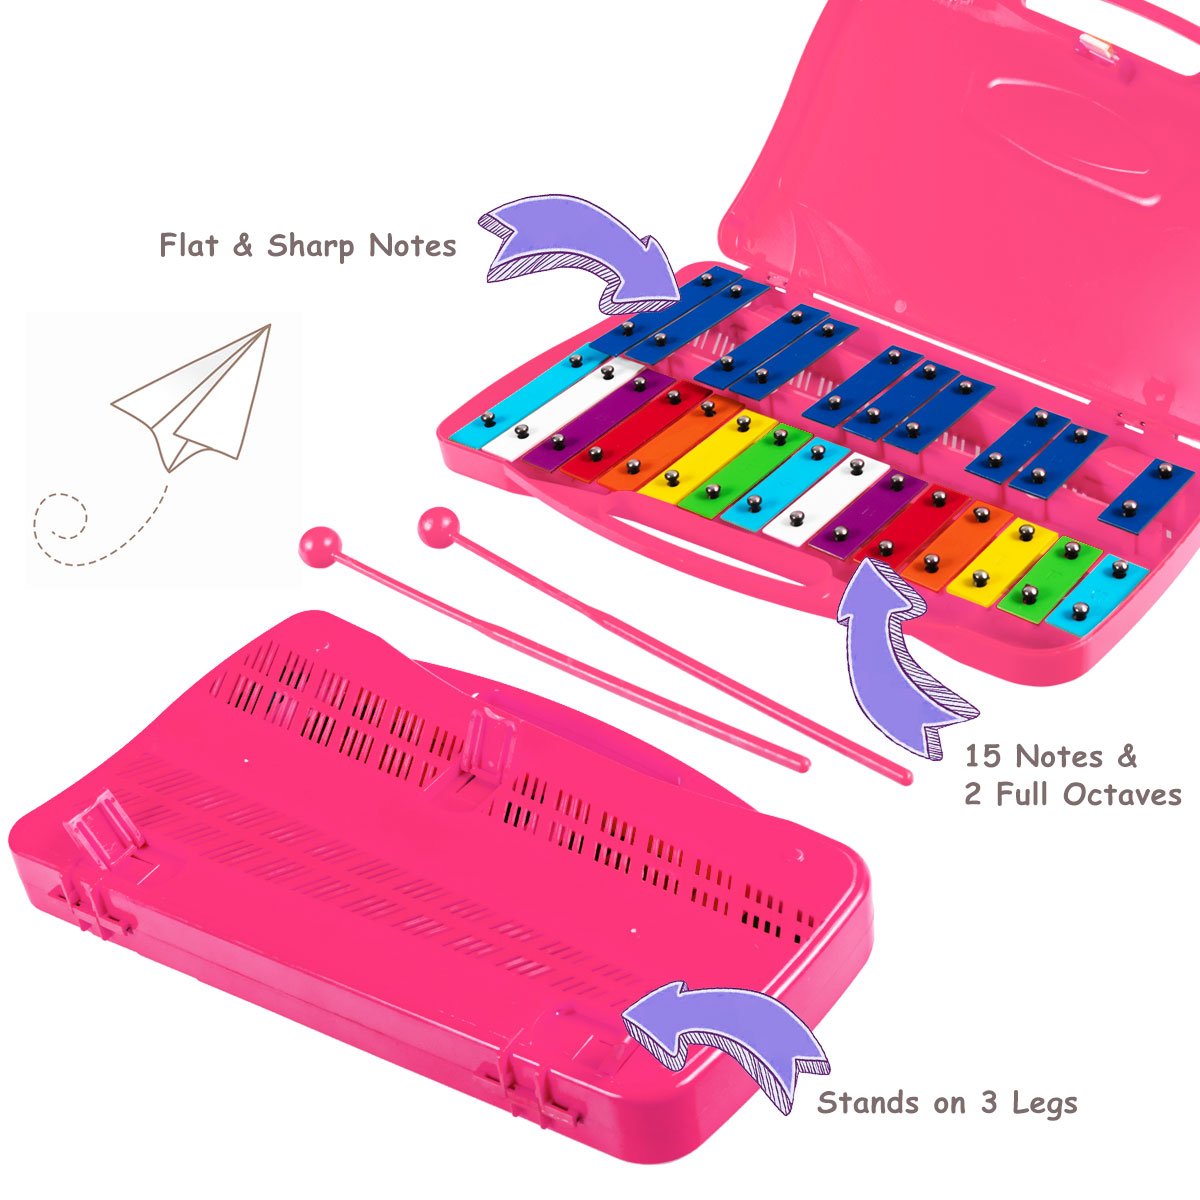 Captivating Xylophone: 25 Note Xylophone with Suitcase for Kids Pink